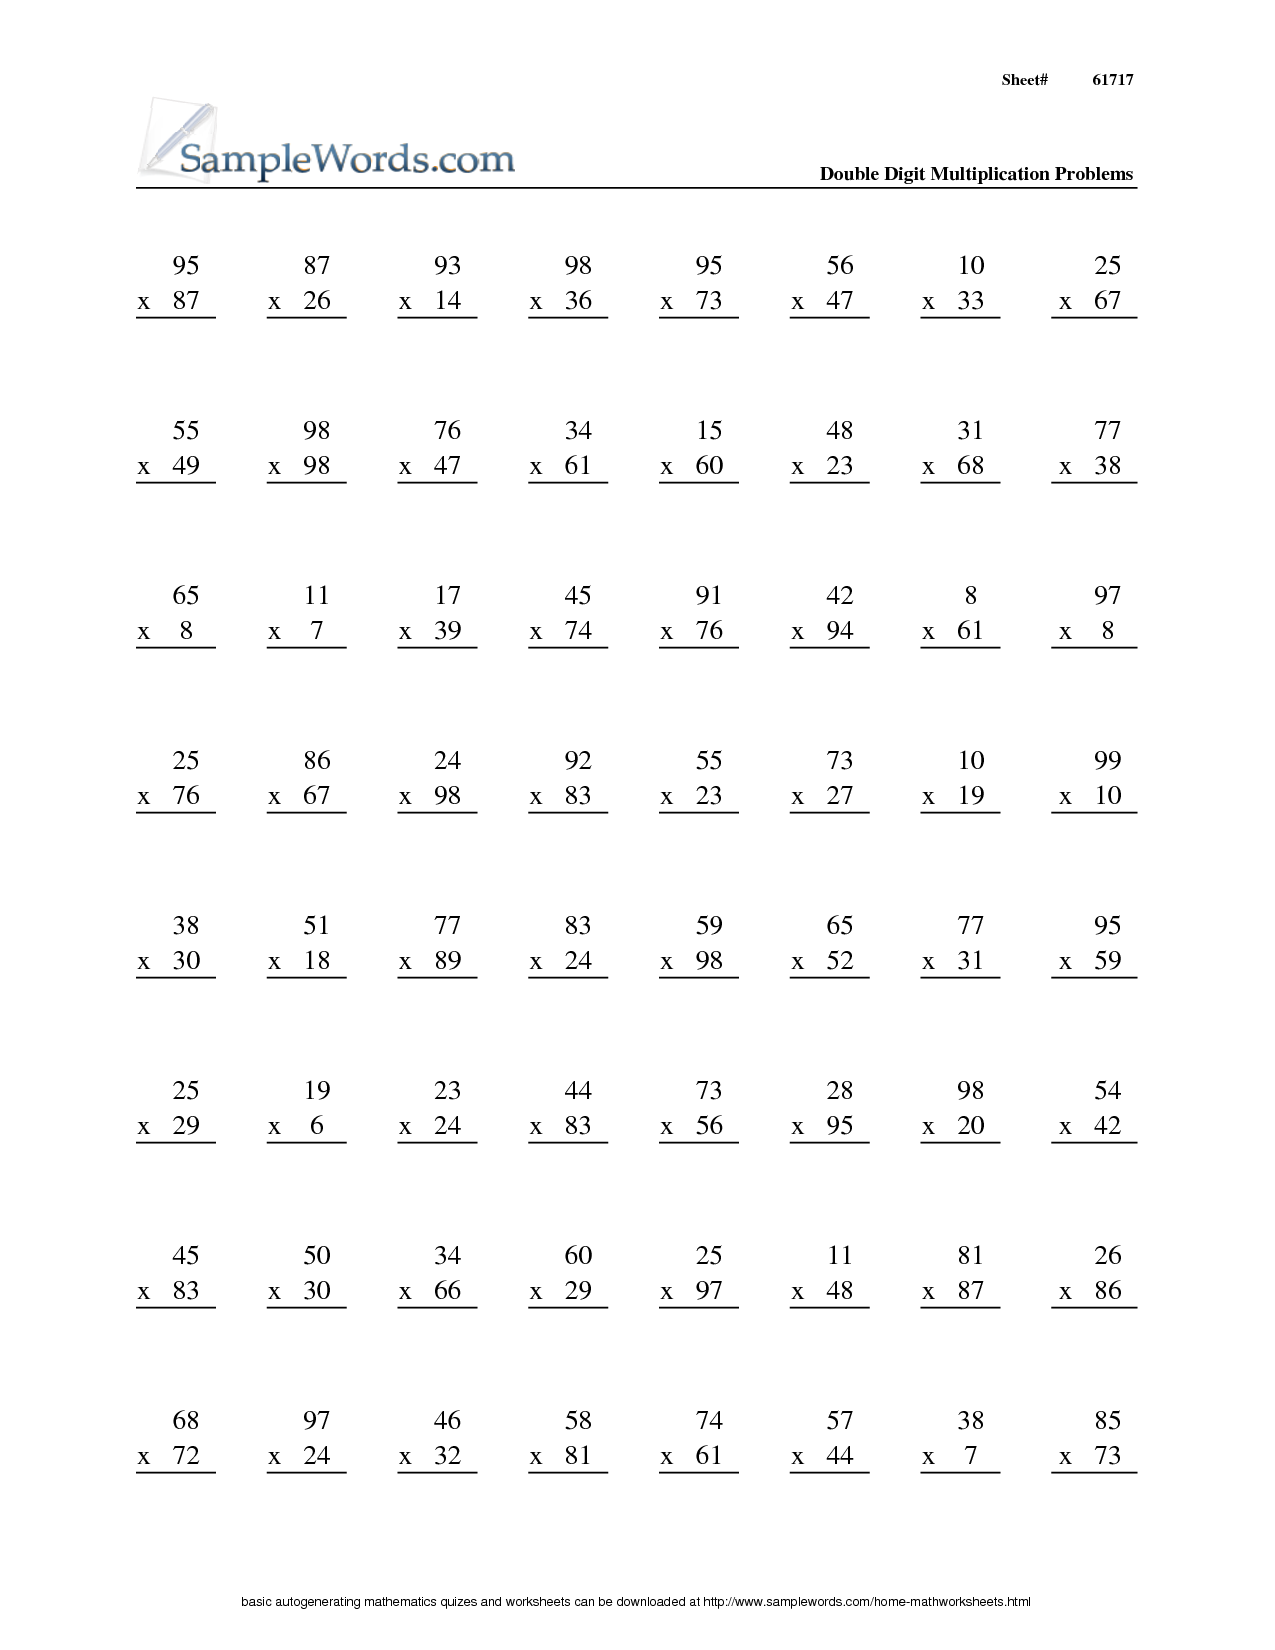 16 Best Images of Mixed Math Worksheets 5th Grade - 4th ...